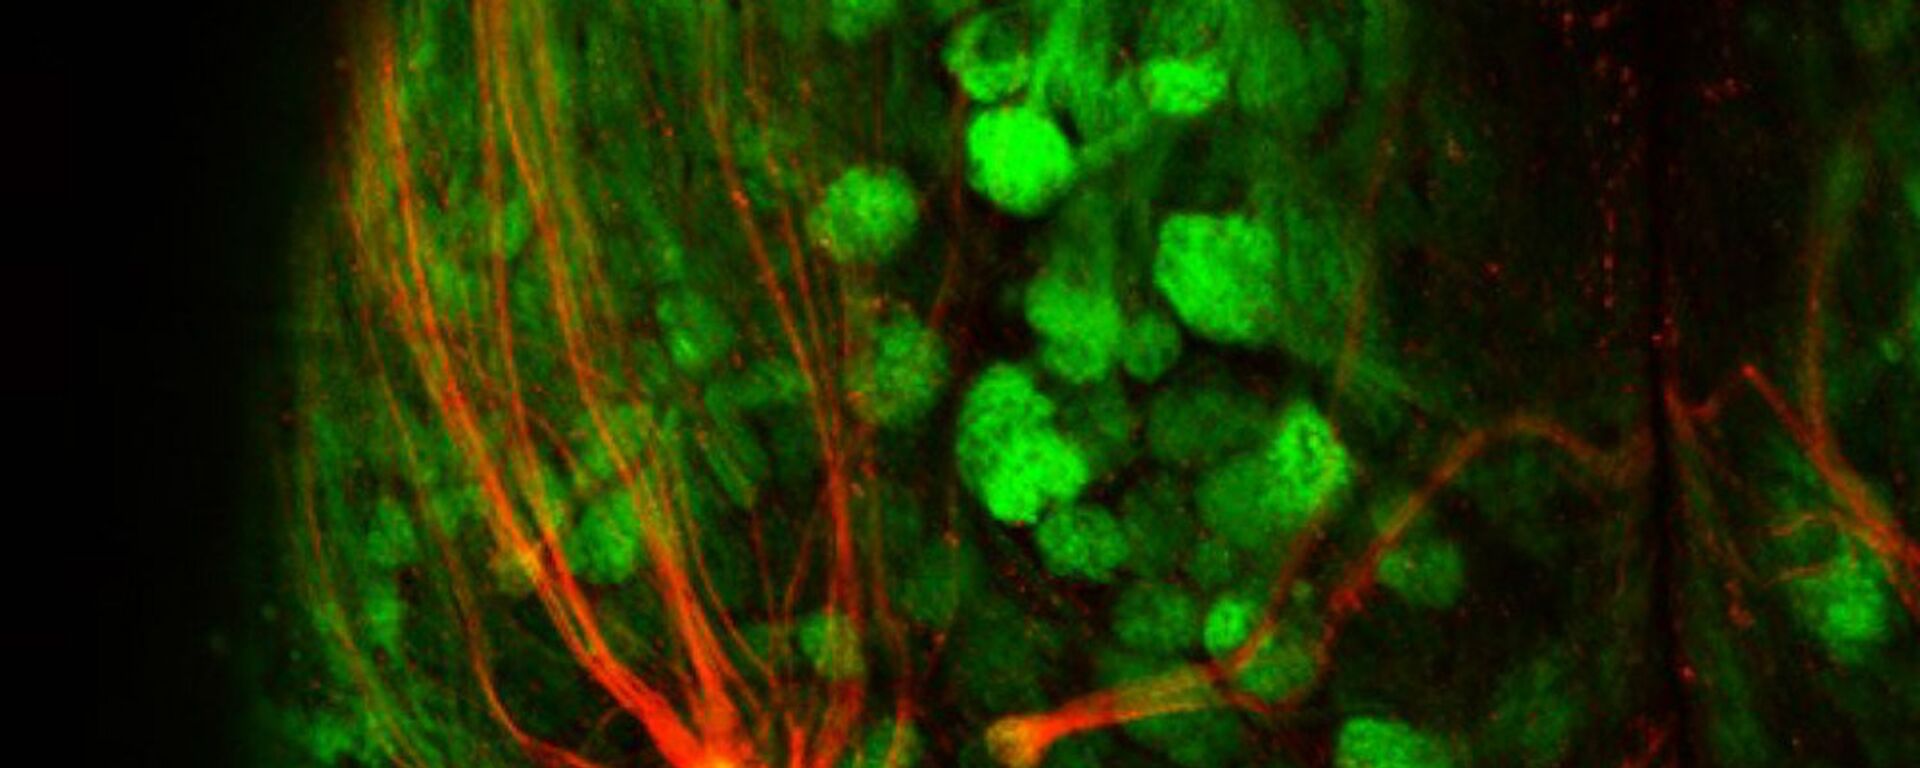 Red fluorescence represents super-sniffer receptors connecting to the brain in the mouse olfactory system while the green fluorescence marks all other odor receptor populations - Sputnik International, 1920, 23.02.2022